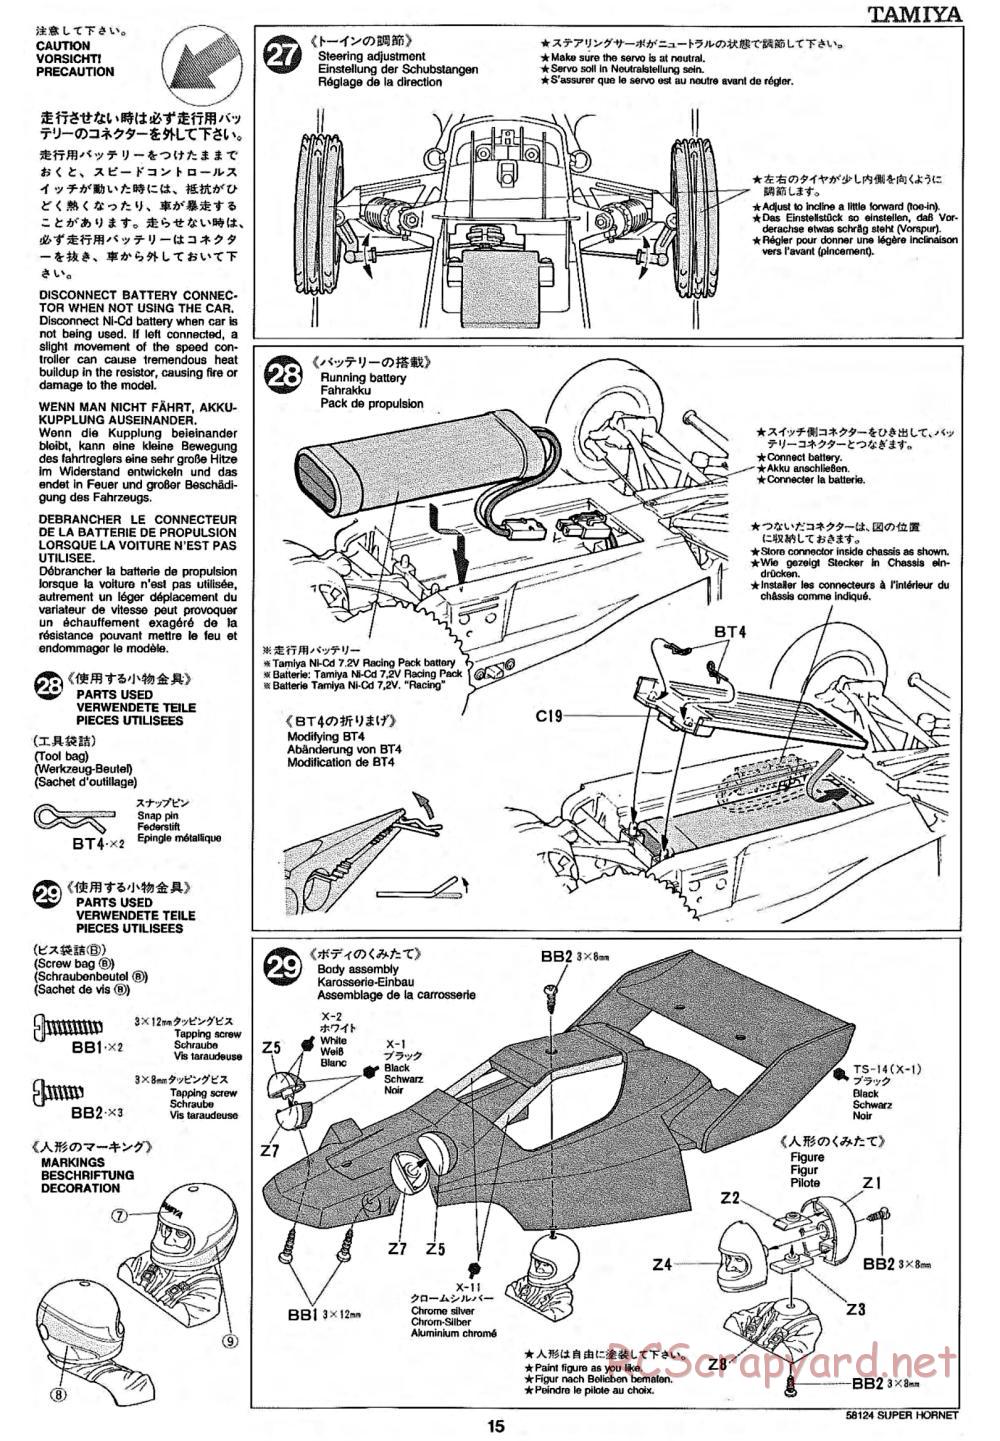 Tamiya - Super Hornet Chassis - Manual - Page 15